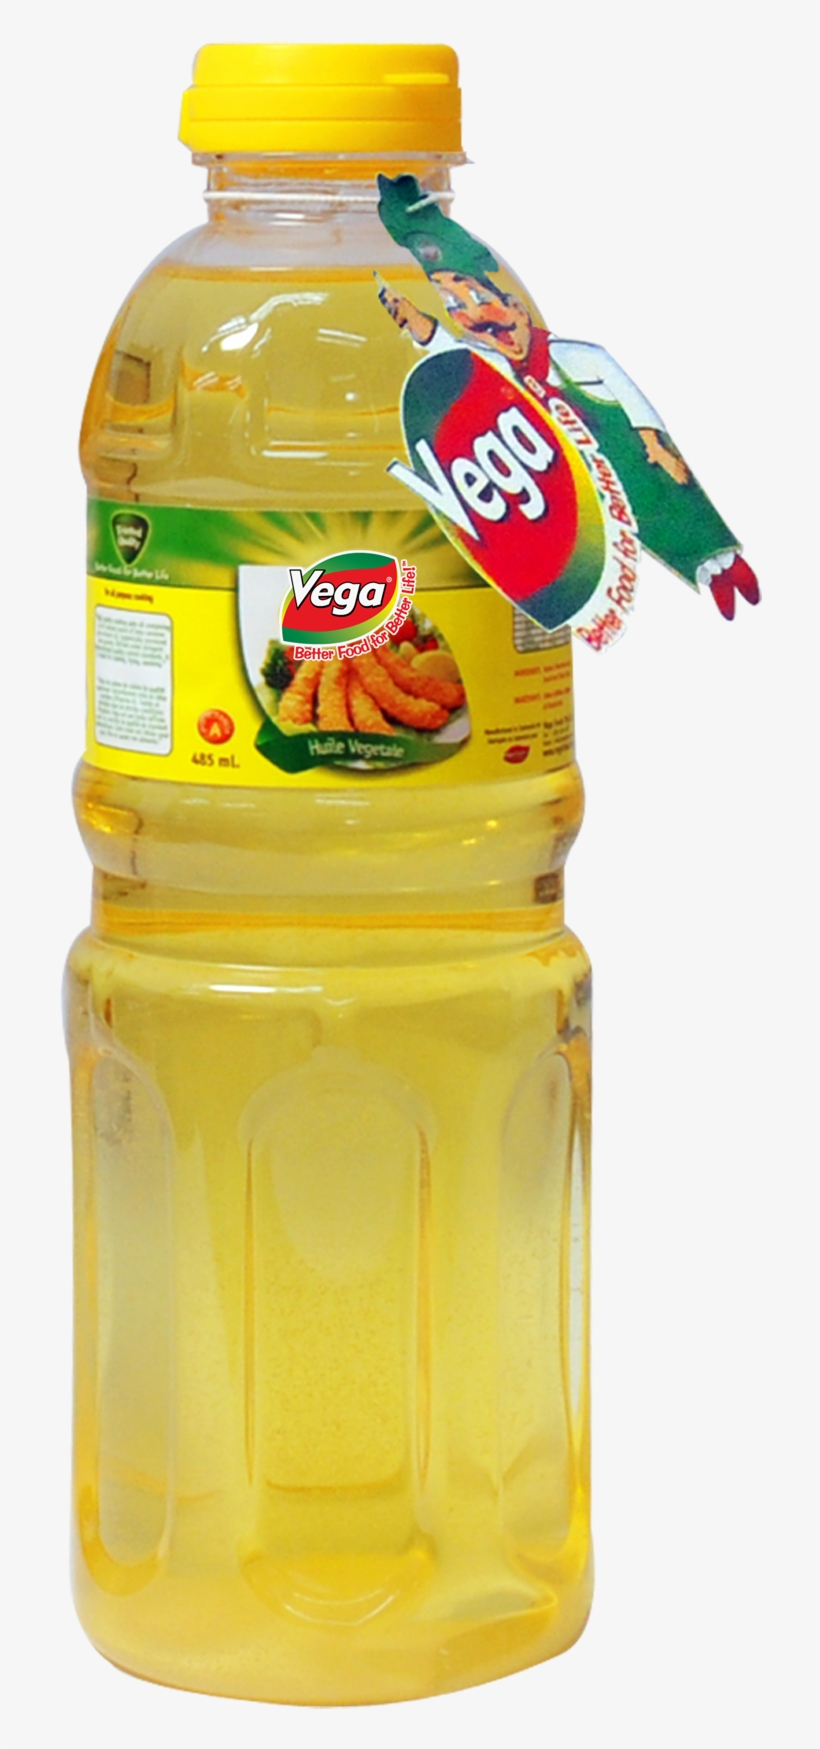 Affordable Cooking Oil In Pure Golden Colour - Cooking Oil, transparent png #4174916